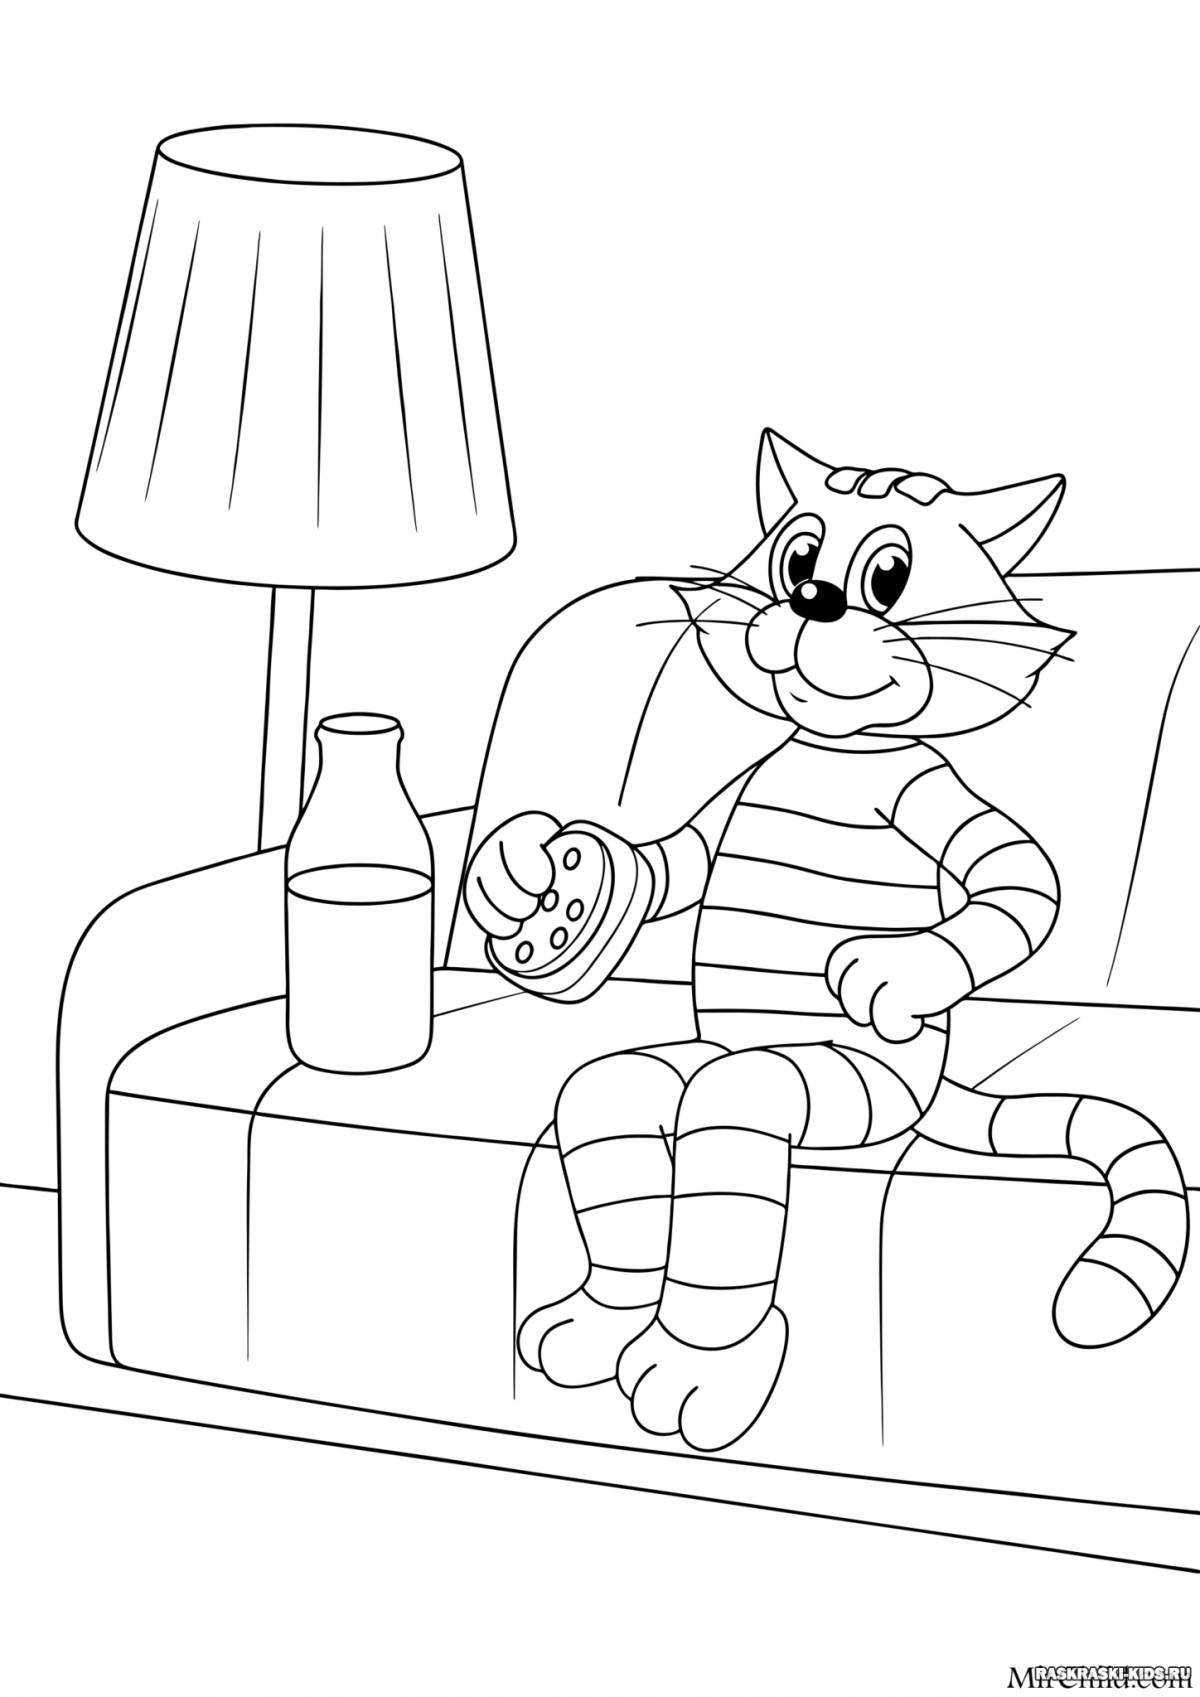 Prostokvashino coloring pages for children 5-6 years old